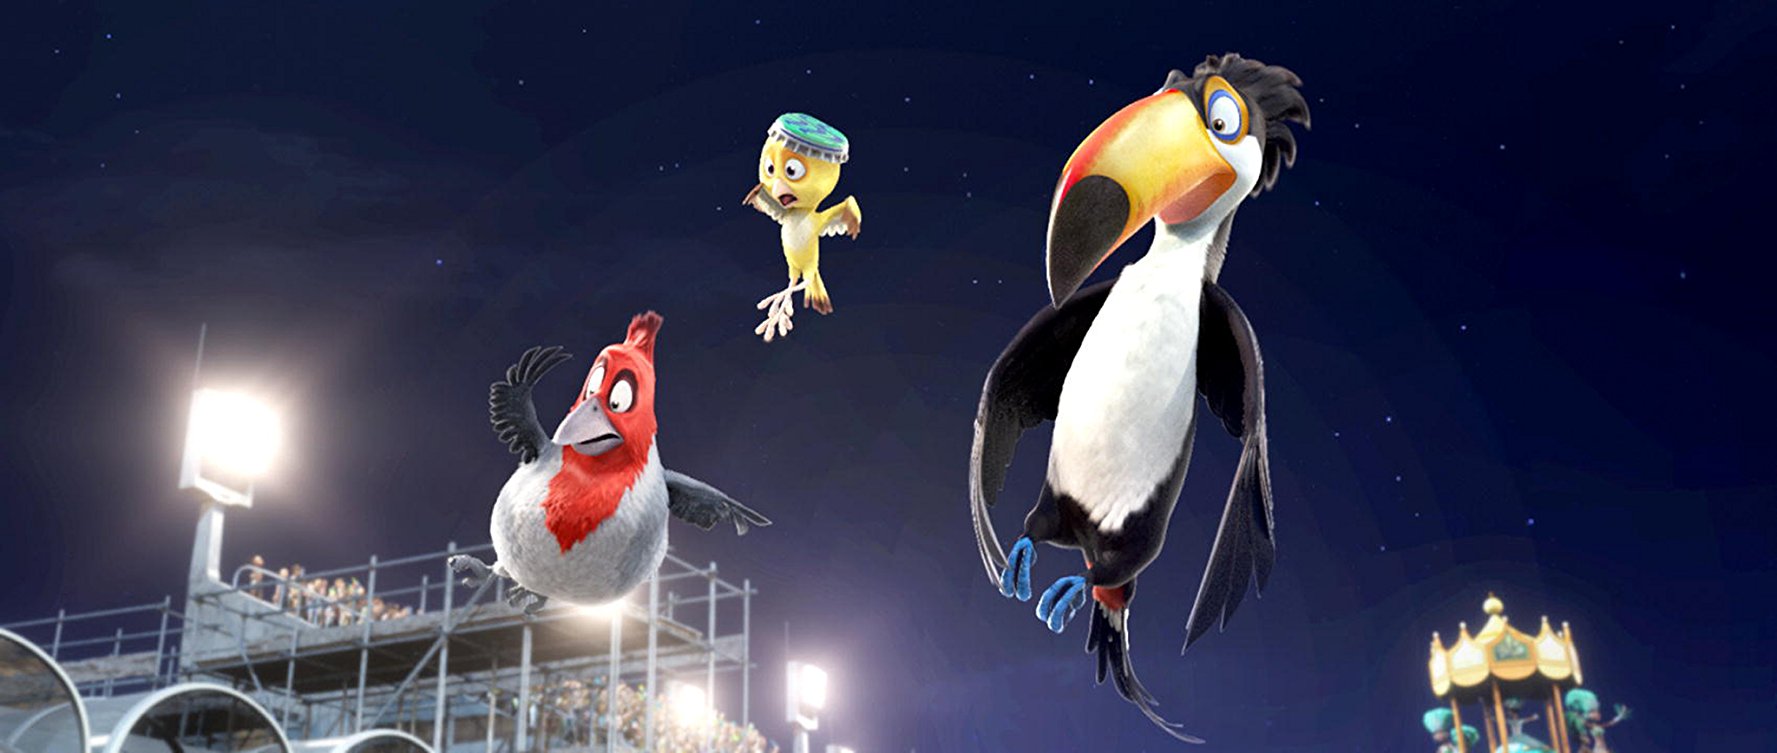 Watch Movies And Tv Shows With Character Pedro For Free List Of Movies Rio 2 Rio